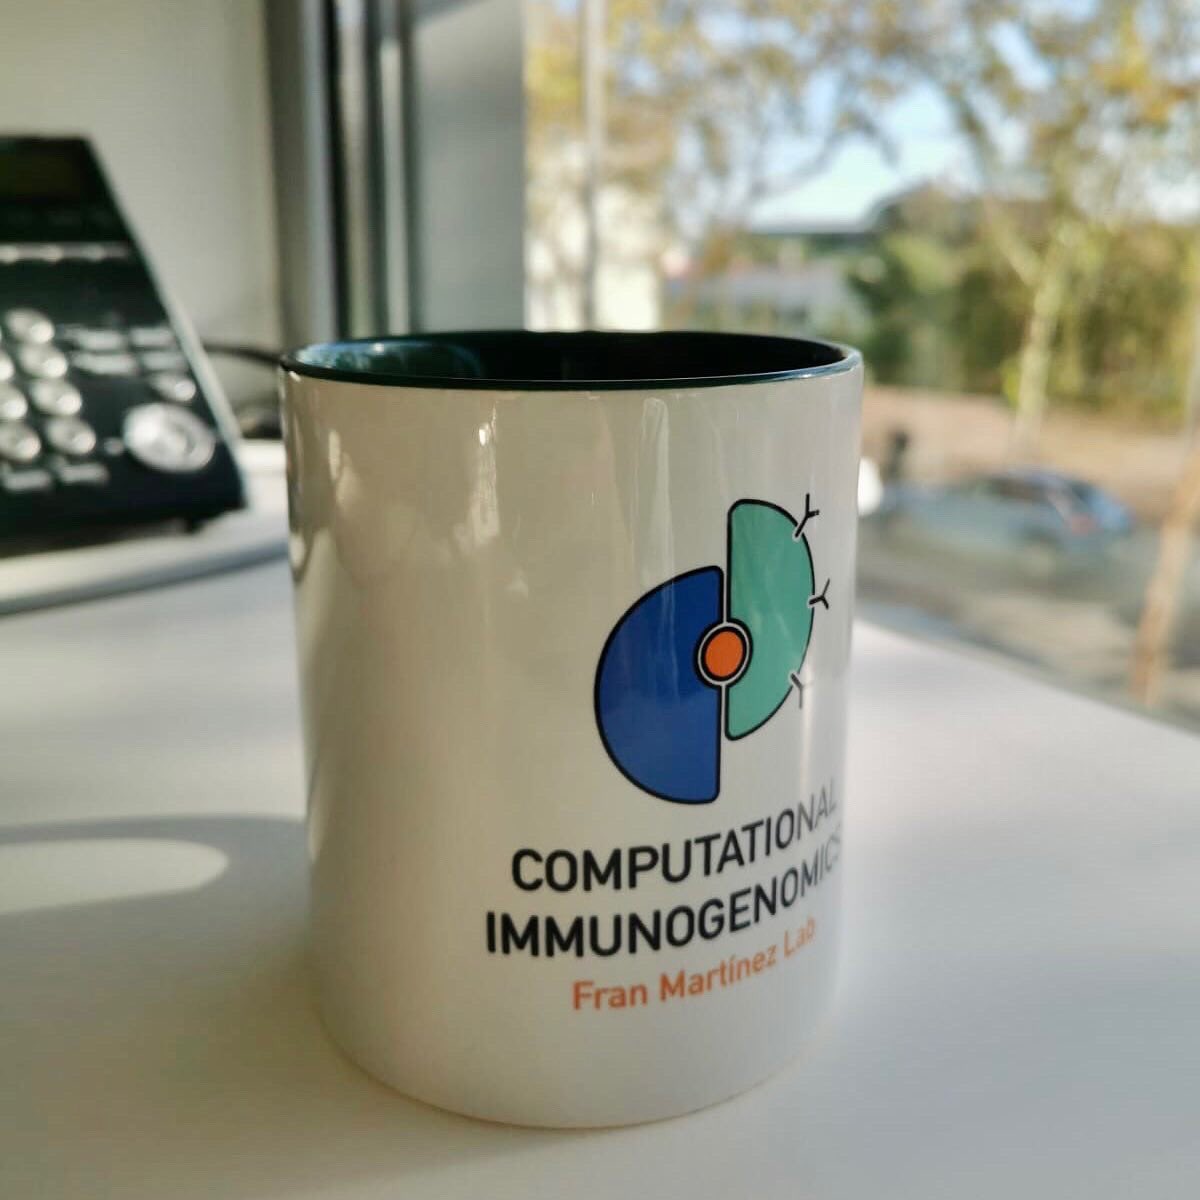 Time to start using this tool #twitter
I start by posting one of my last works. It is a #laboratory #logo for Dr.Fran Martínez at @VHIO

It synthetizes his work on desciphering the interaction of #cancercells and #immunecells by #bioinformatics 

Love how it looks in their mugs!